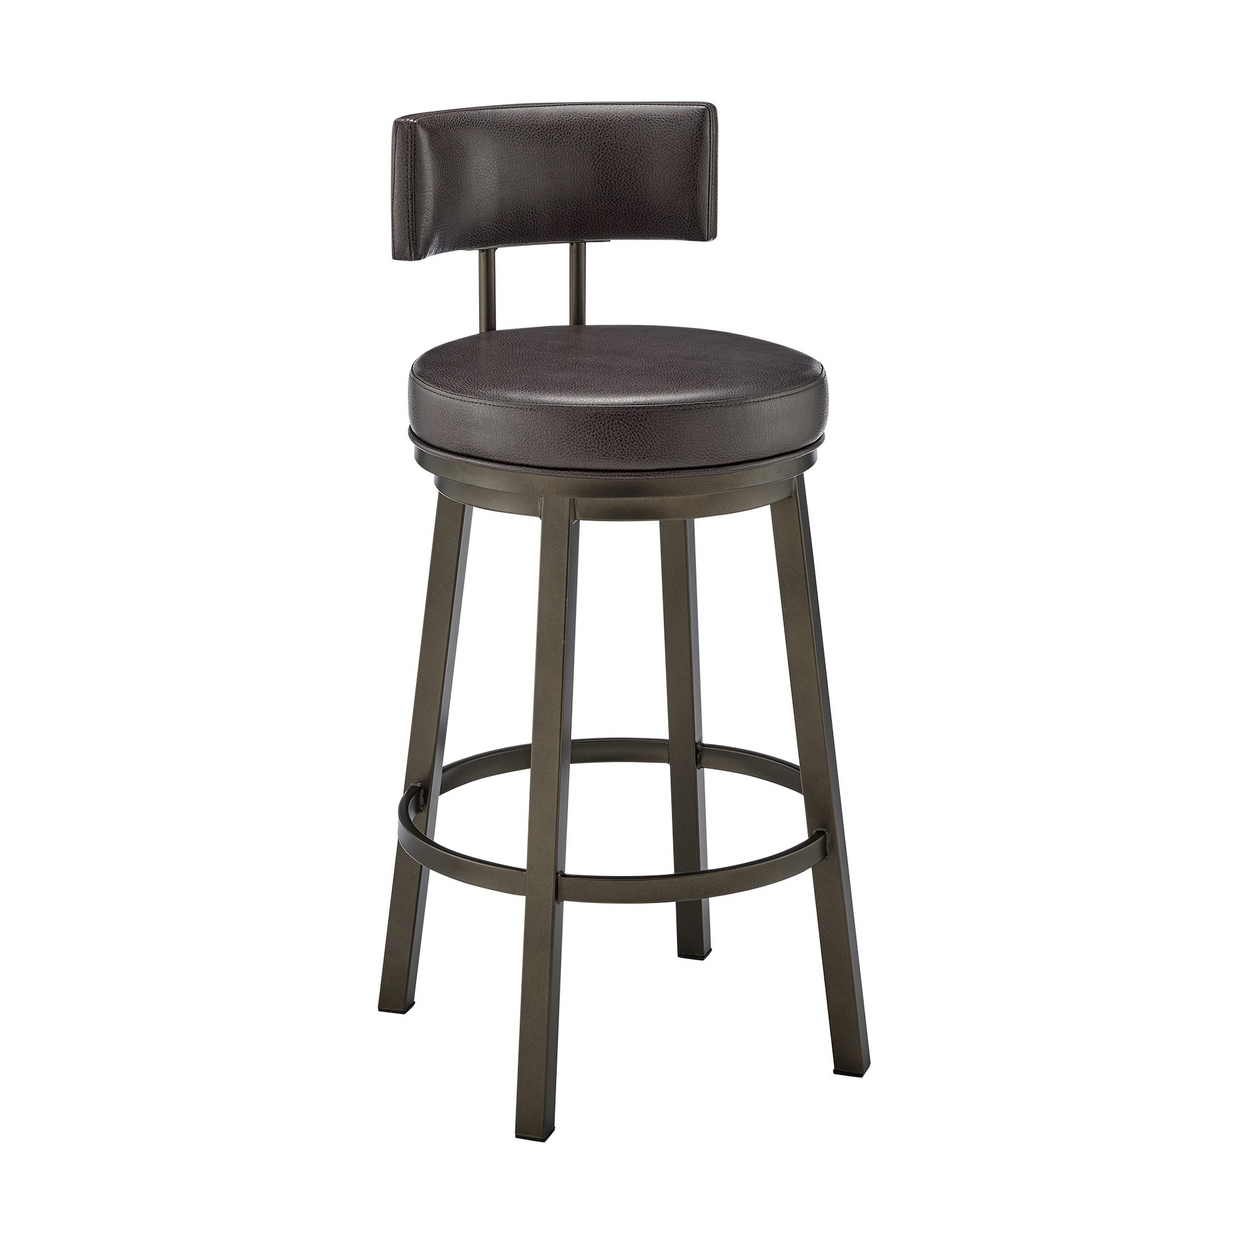 Eleanor 26 Inch Swivel Counter Stool Chair, Round Brown Faux Leather Seat- Saltoro Sherpi